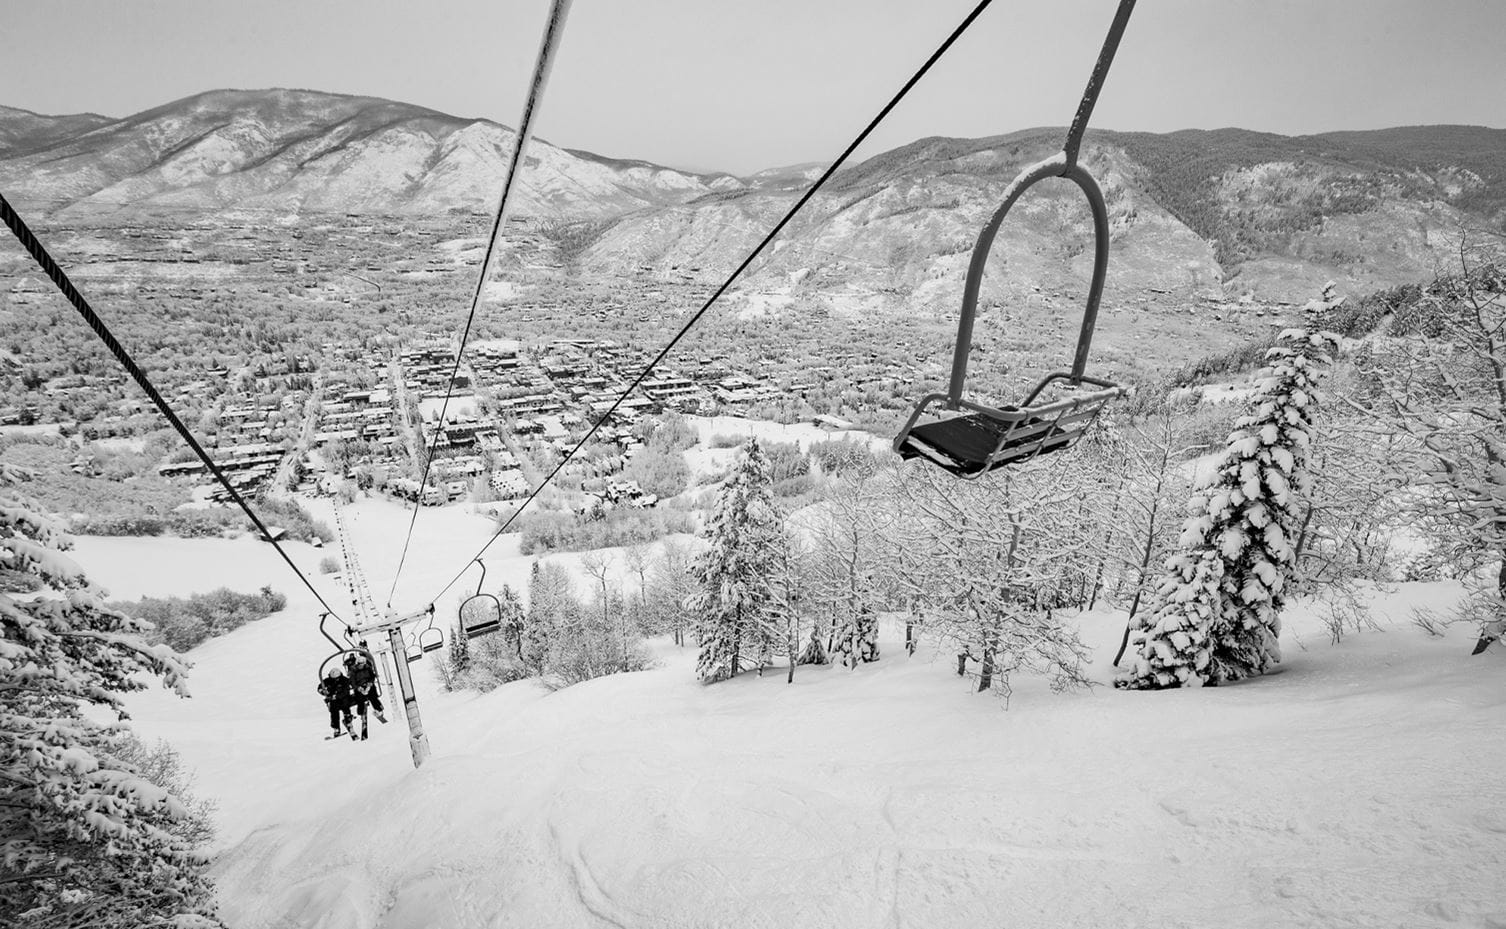 Lifts in black and white at Aspen Mountain